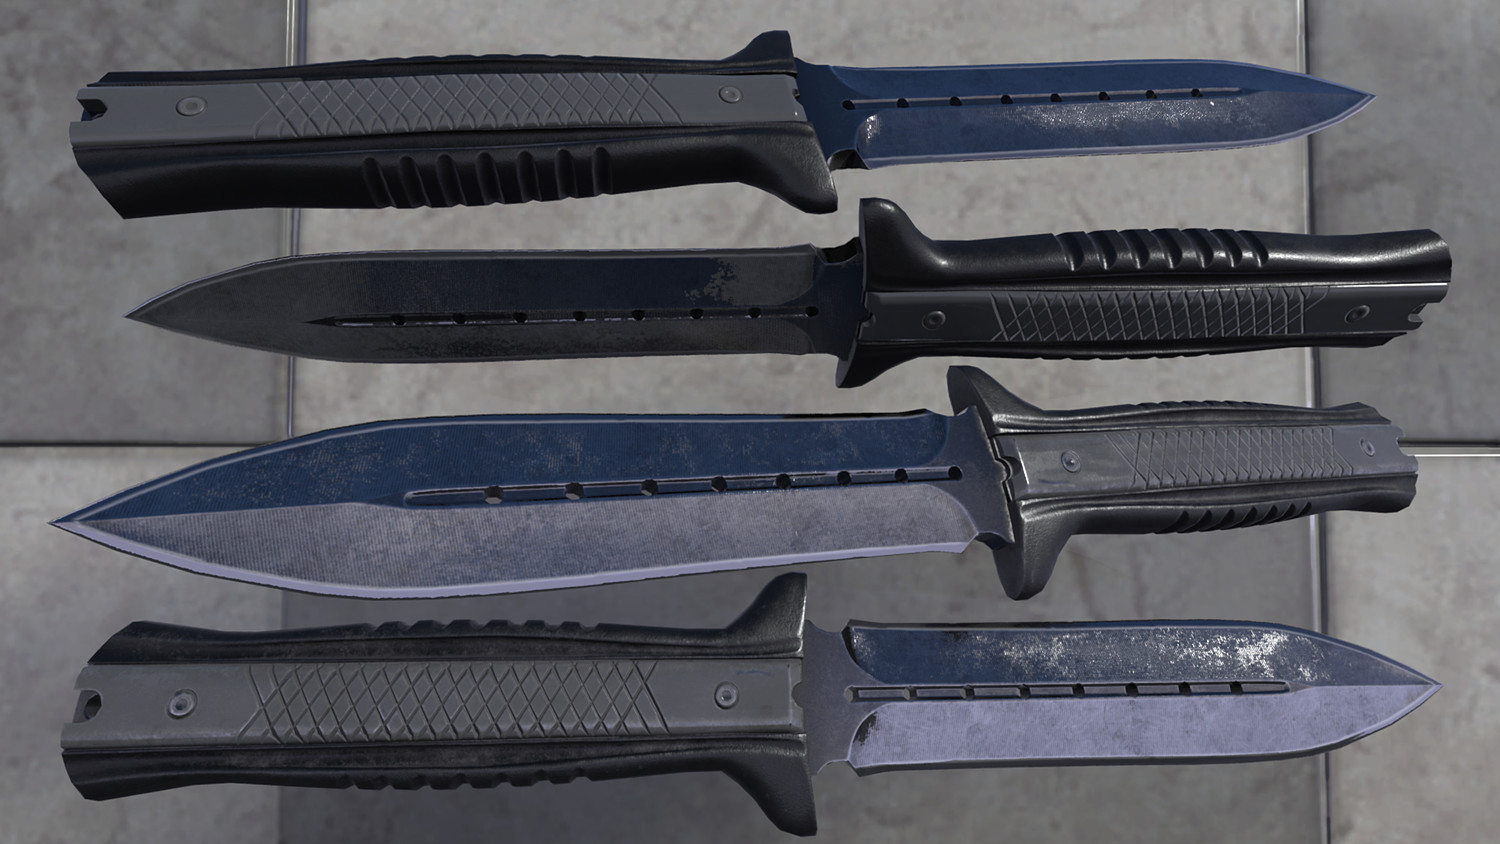 HQ PBR Combat knives pack